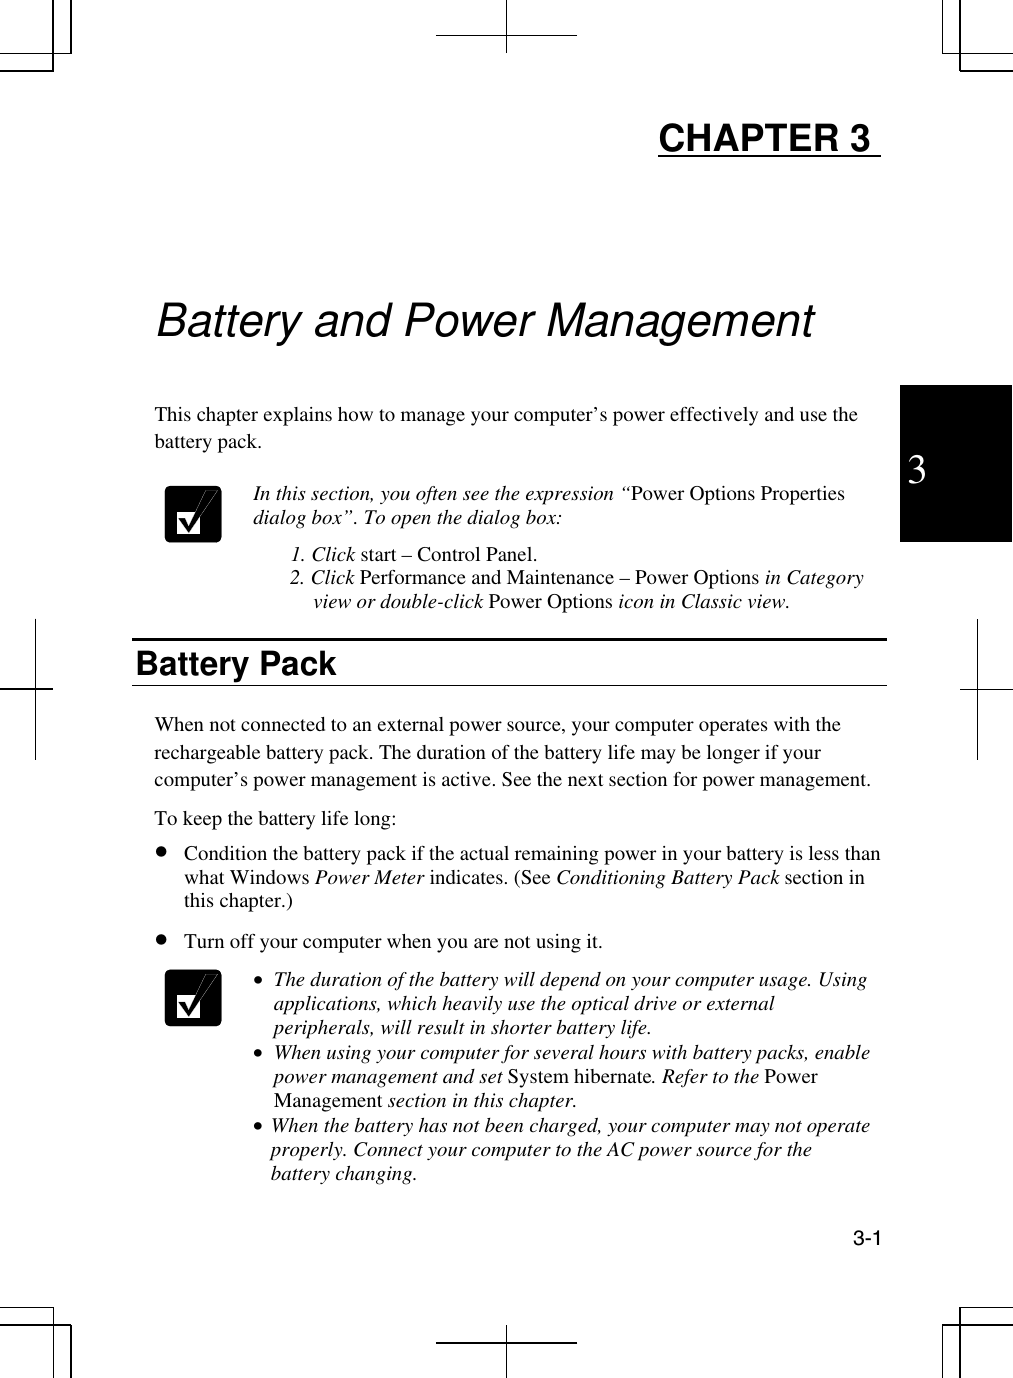  3-1  3 CHAPTER 3      Battery and Power Management  This chapter explains how to manage your computer’s power effectively and use the battery pack.   In this section, you often see the expression “Power Options Properties dialog box”. To open the dialog box: 1. Click start – Control Panel.        2. Click Performance and Maintenance – Power Options in Category view or double-click Power Options icon in Classic view.   Battery Pack  When not connected to an external power source, your computer operates with the rechargeable battery pack. The duration of the battery life may be longer if your computer’s power management is active. See the next section for power management.  To keep the battery life long:  •  Condition the battery pack if the actual remaining power in your battery is less than what Windows Power Meter indicates. (See Conditioning Battery Pack section in this chapter.) •  Turn off your computer when you are not using it.  •  The duration of the battery will depend on your computer usage. Using applications, which heavily use the optical drive or external peripherals, will result in shorter battery life. •  When using your computer for several hours with battery packs, enable power management and set System hibernate. Refer to the Power Management section in this chapter. •  When the battery has not been charged, your computer may not operate properly. Connect your computer to the AC power source for the battery changing. 